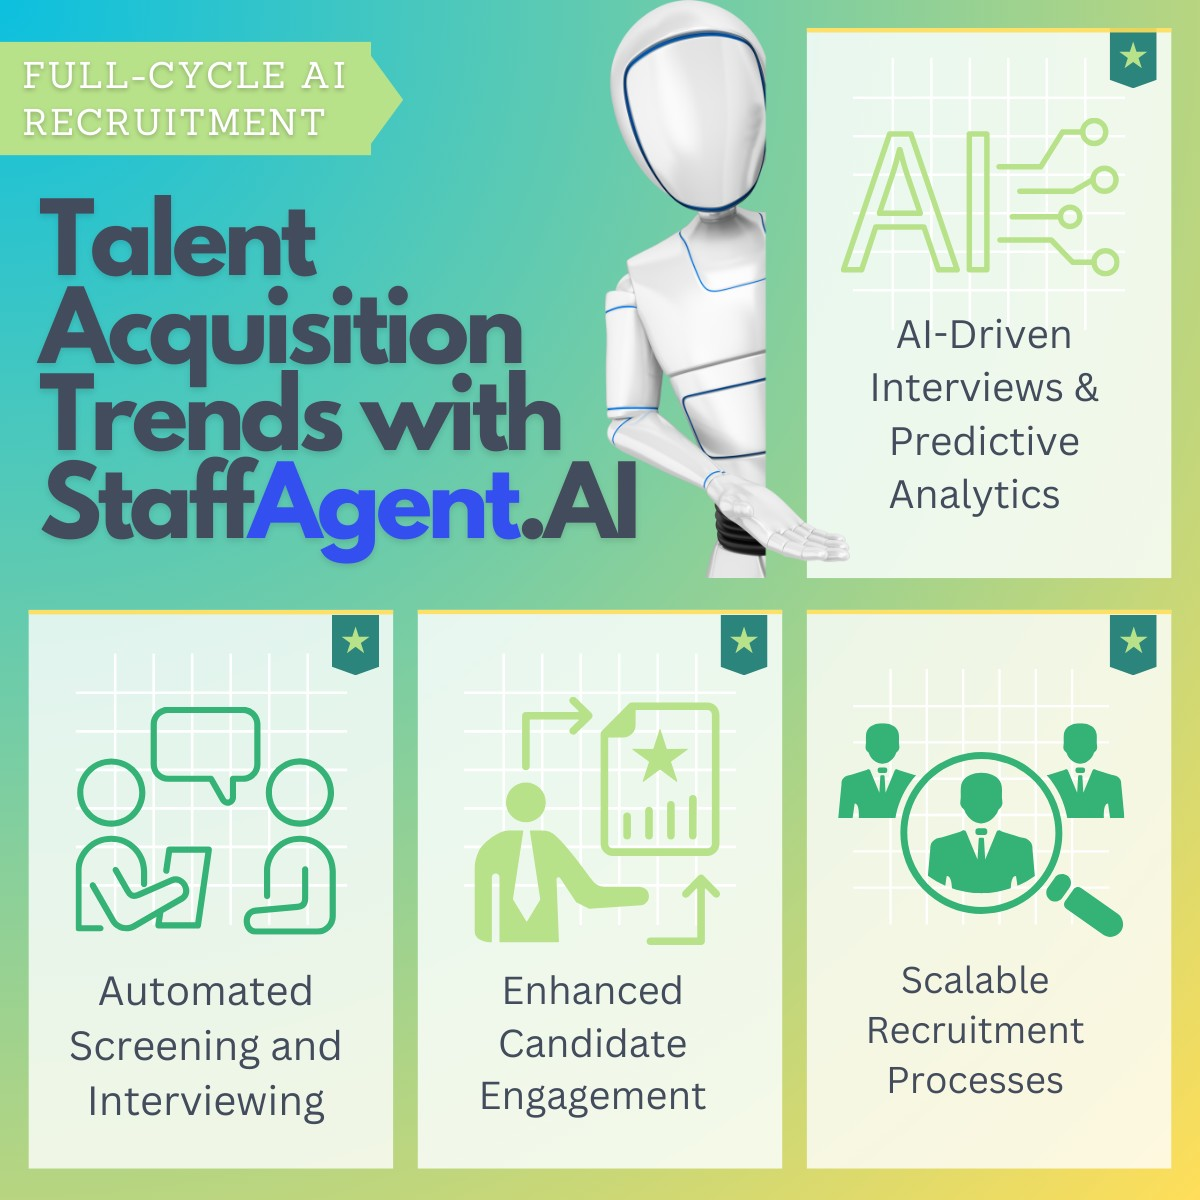 Transform Your Hiring with AI-Driven Interviews & Predictive Analytics